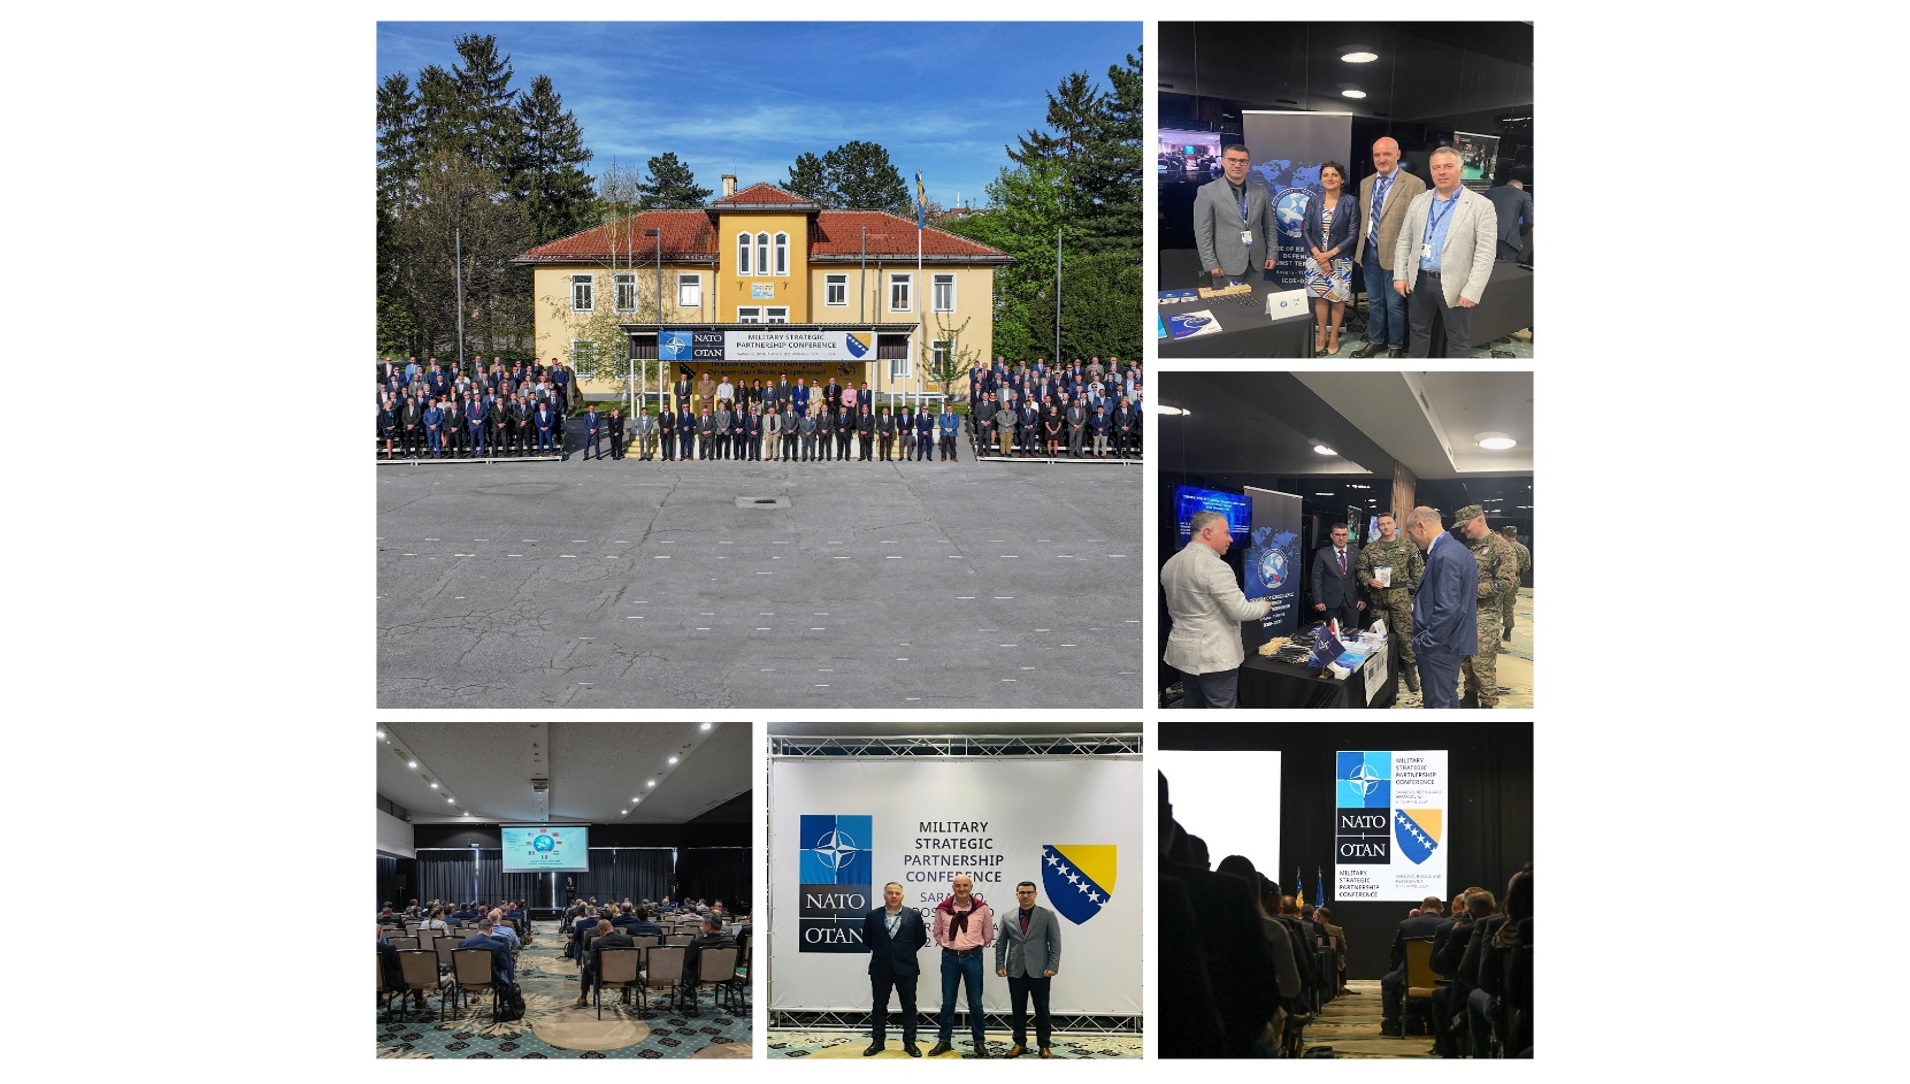 COE-DAT participated in the annual NATO Military Strategic Partnership Conference and Exhibition held in Sarajevo from 08 to 12 April 2024 and delivered a counterterrorism expert panel to the audience.